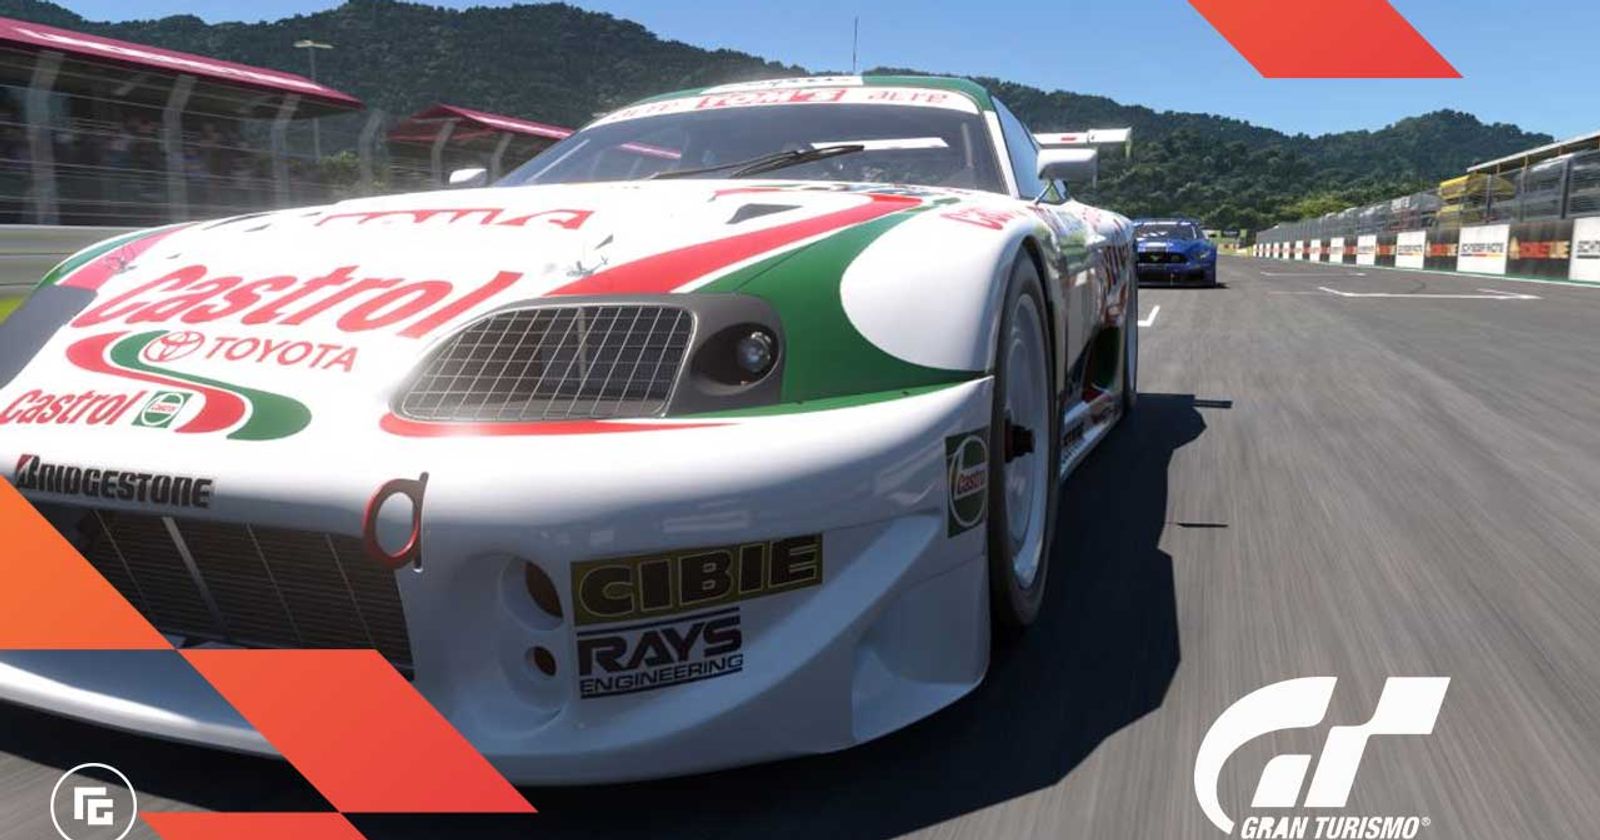 Gran Turismo 7 patch 1.11 increases in-game rewards